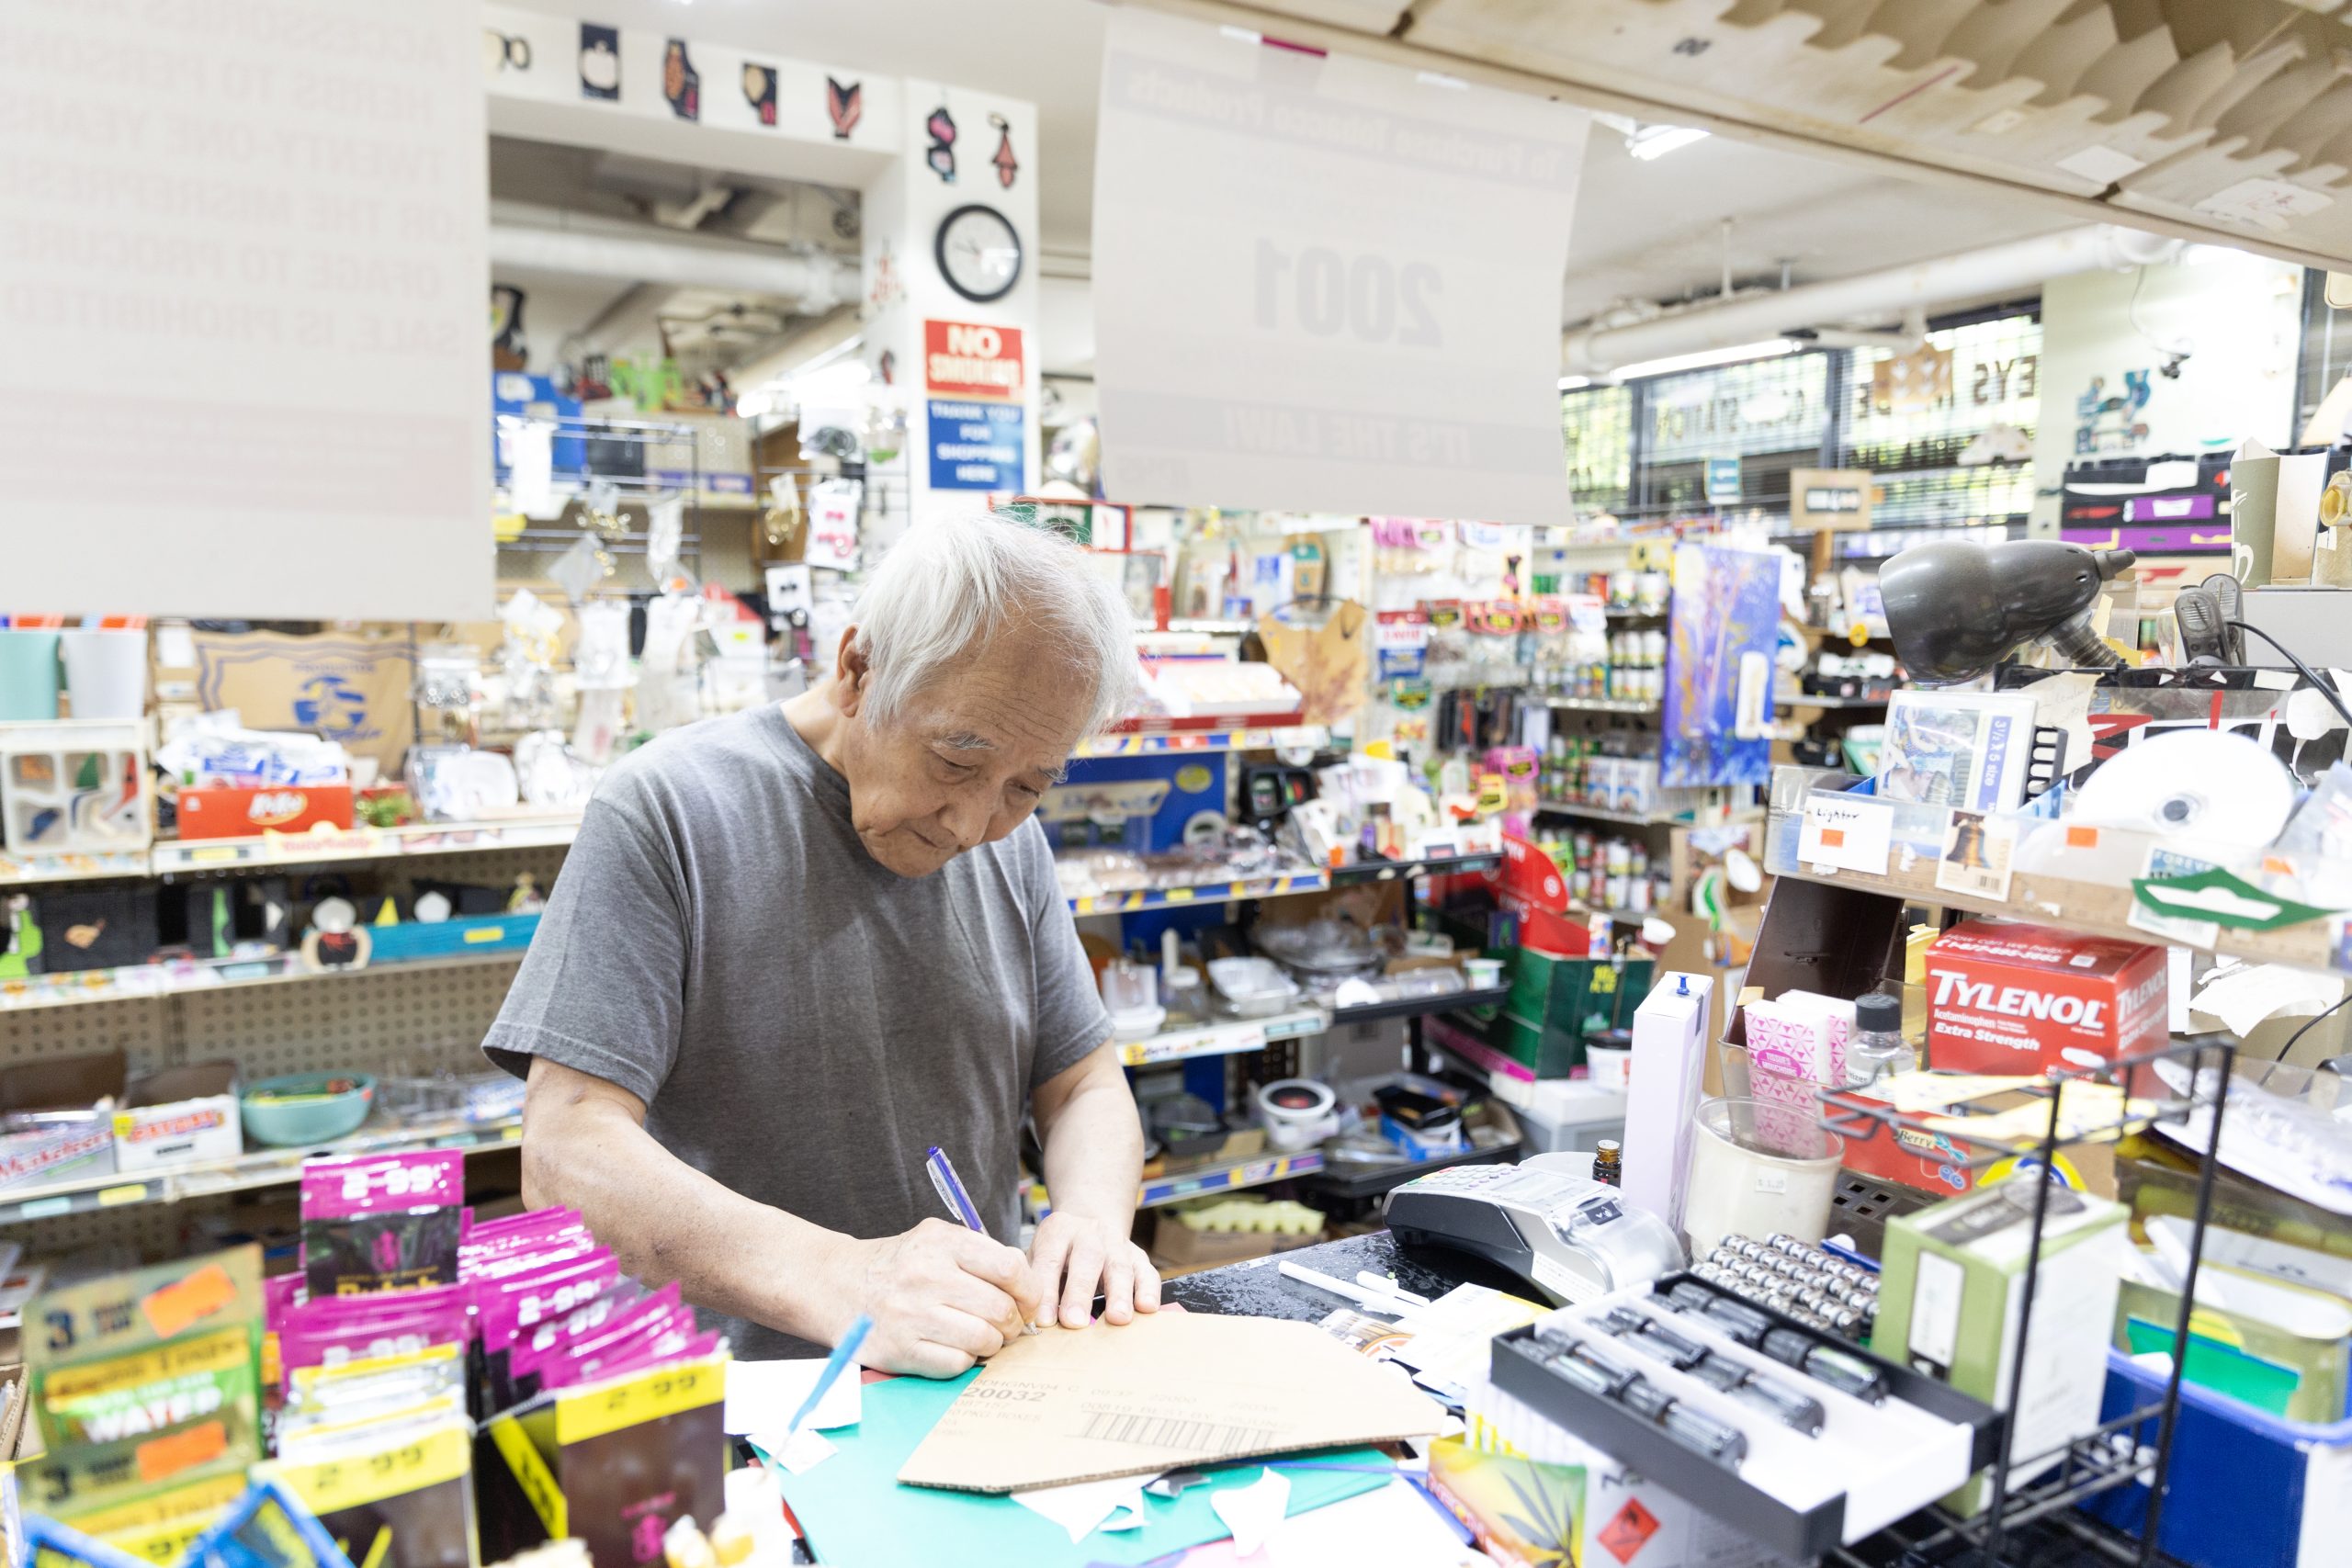 Image: Thomas Kong, an elderly, gray-haired man in a gray T-shirt is seen working behind a store counter. He is seen writing something on a piece of cut cardboard. Photograph by S.Y. Lim